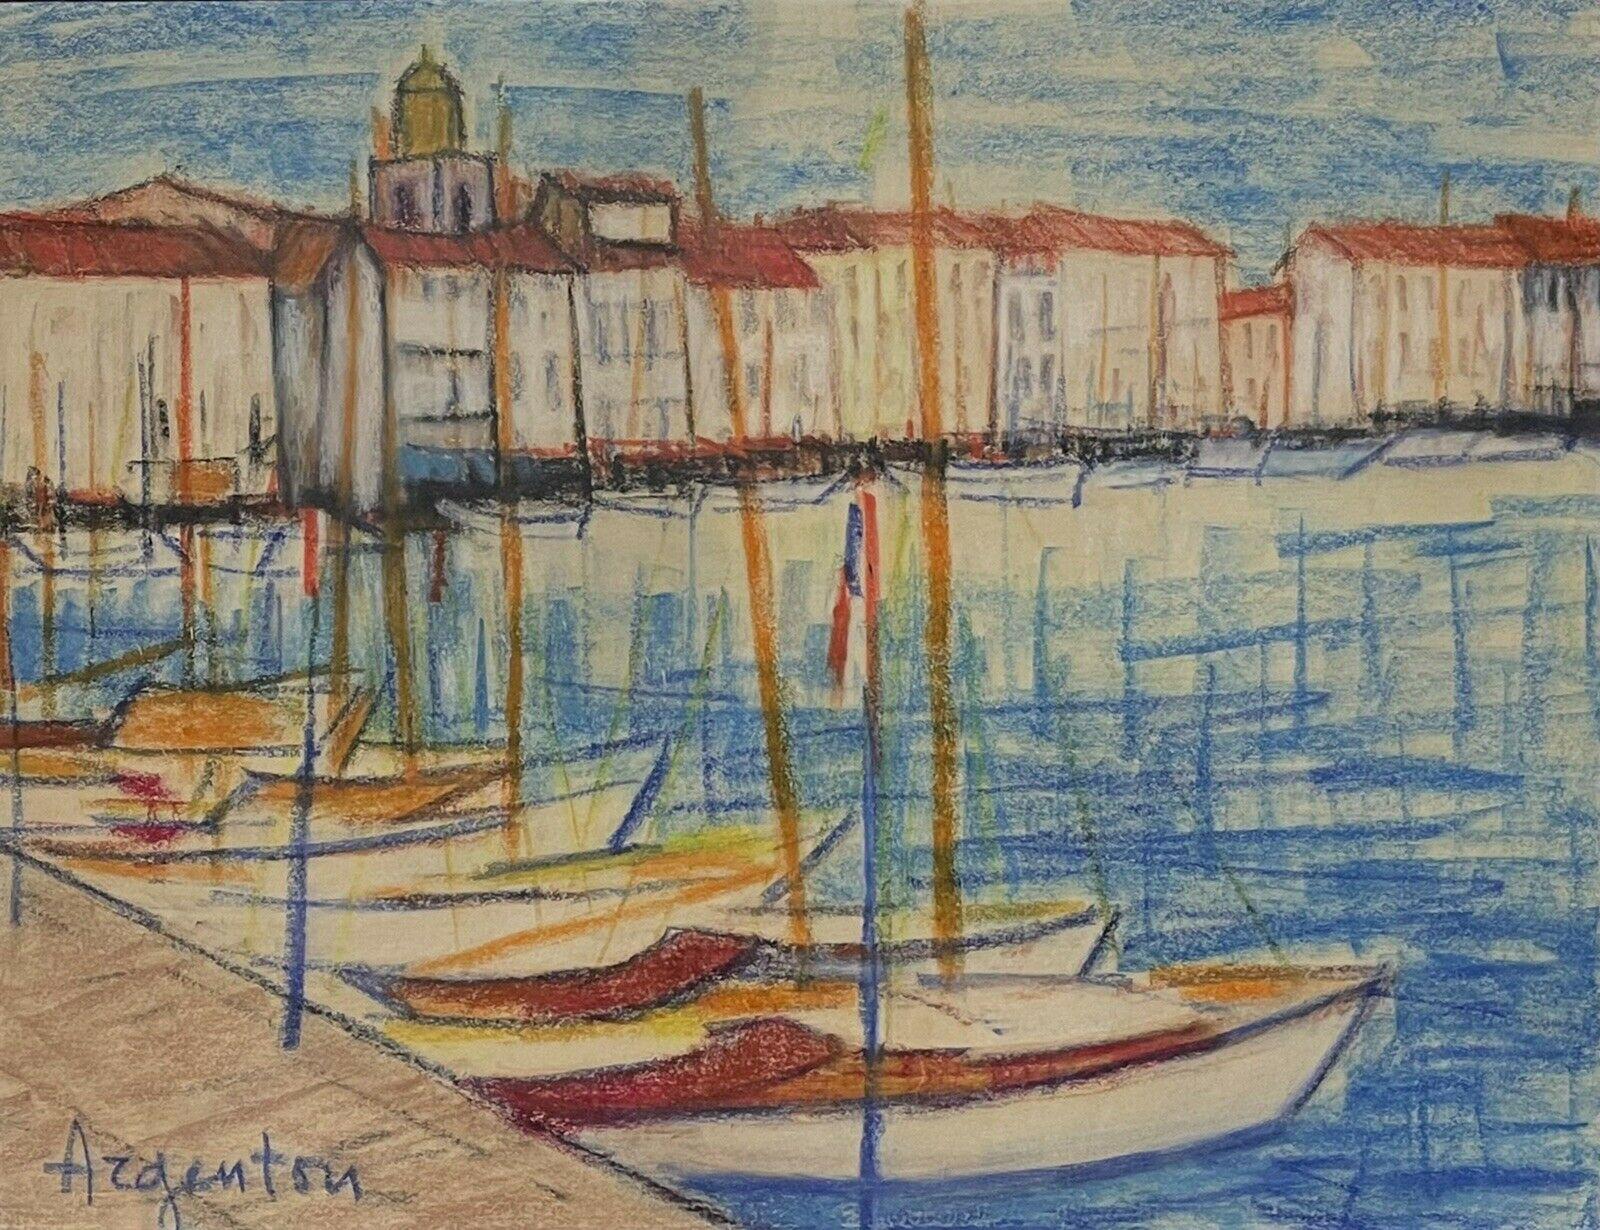 Mid 20th Century French Painting - St. Tropez Harbour with Boats lined up